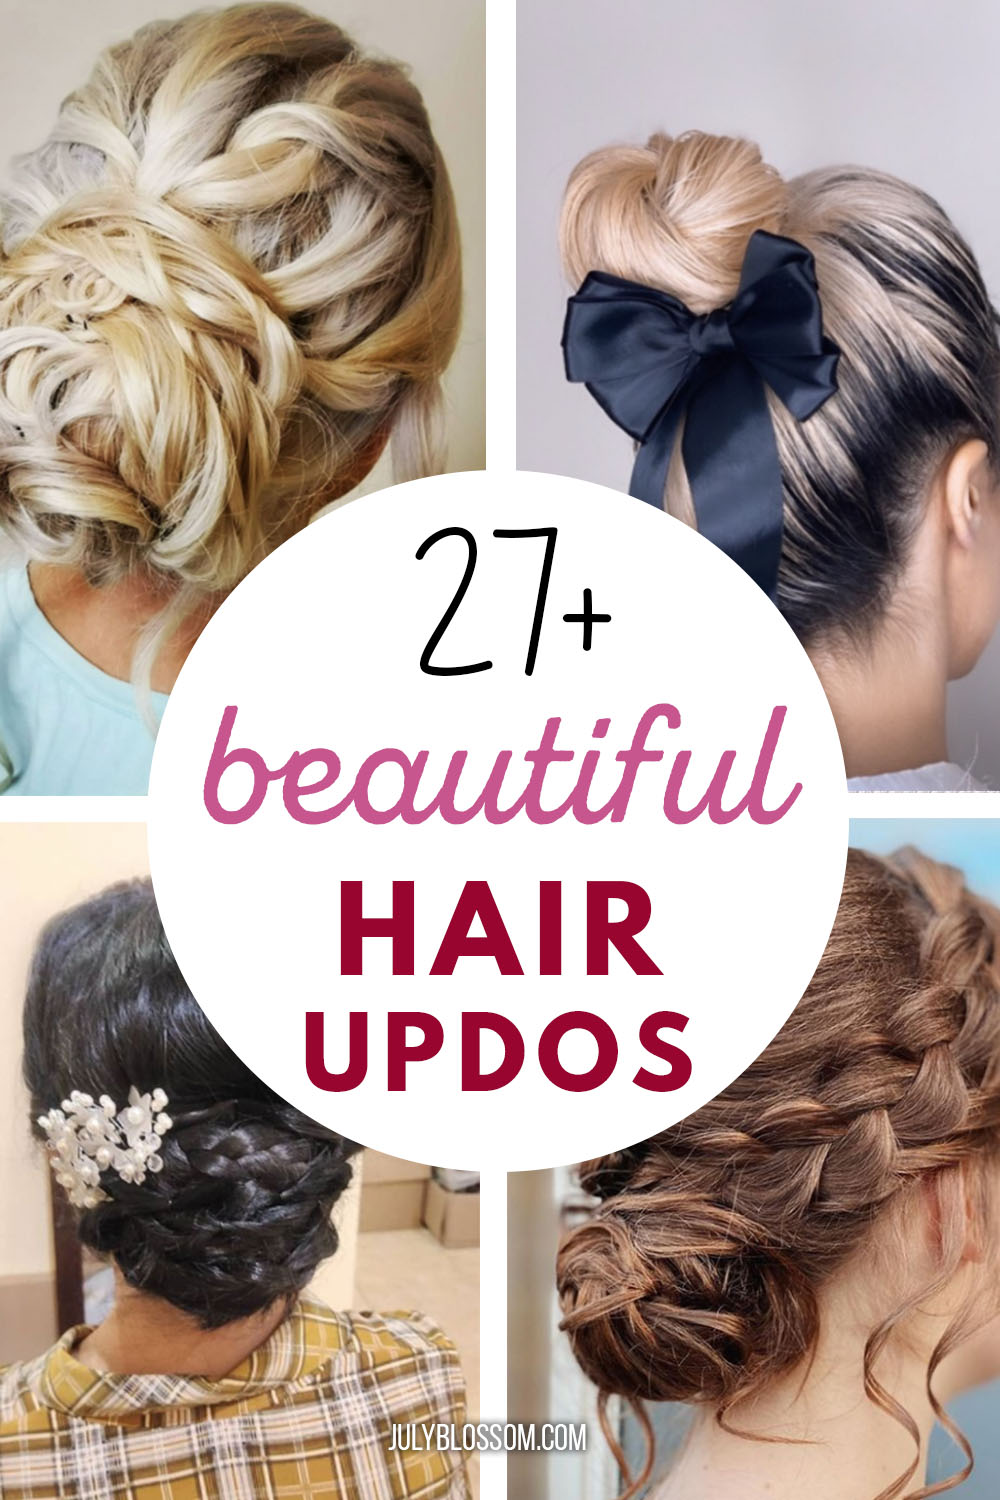 27+ Beautiful Updo Hairstyles for Medium to Long Hair - ♡ July Blossom ♡